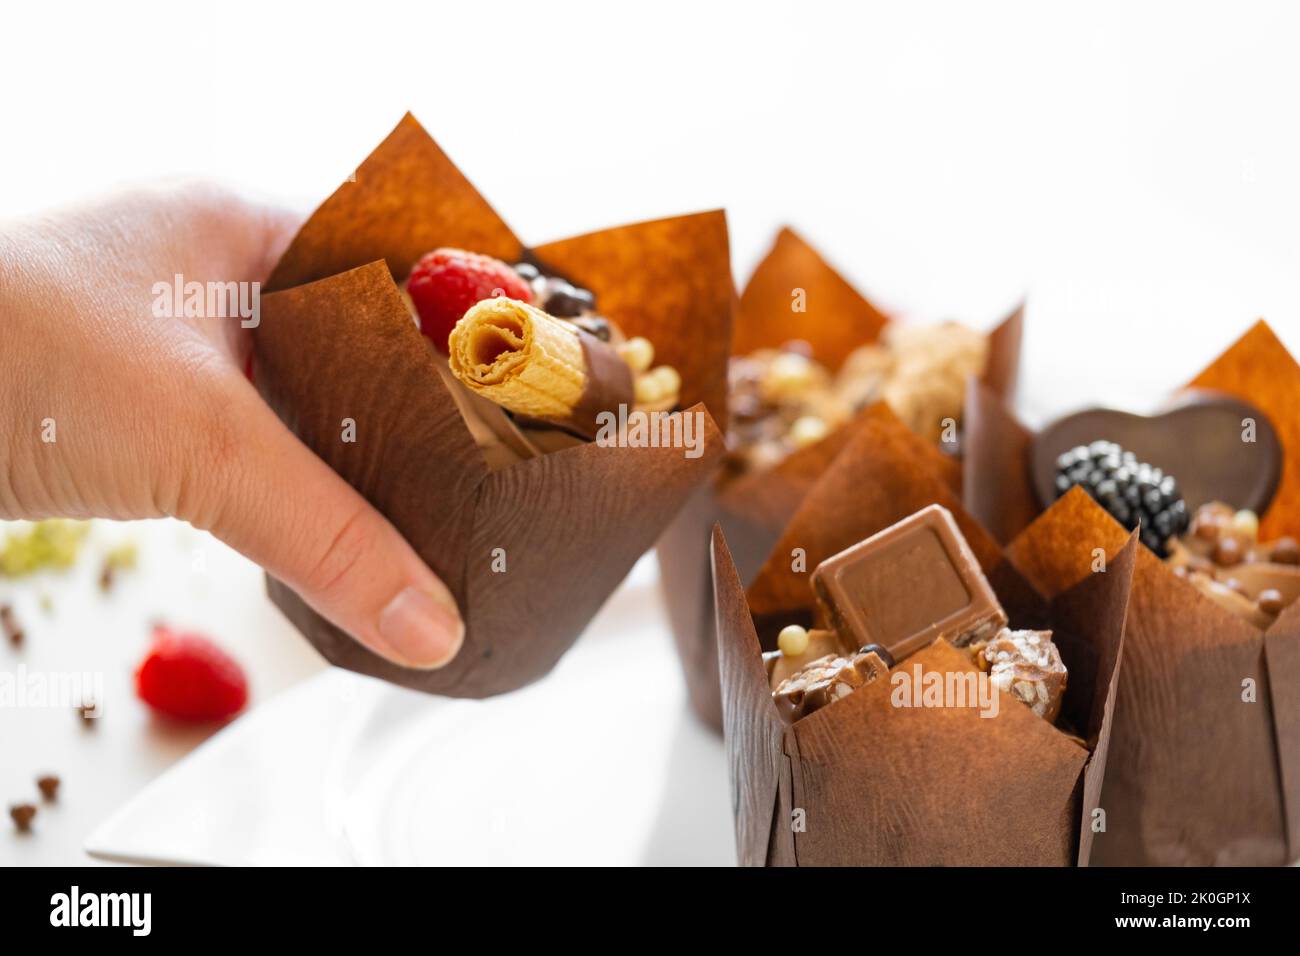 Appetizing muffin in hand on the table with sweets and pastries.Chocolate dessert. Assorted sweet table.Sweets and desserts. Baked goods and desserts Stock Photo